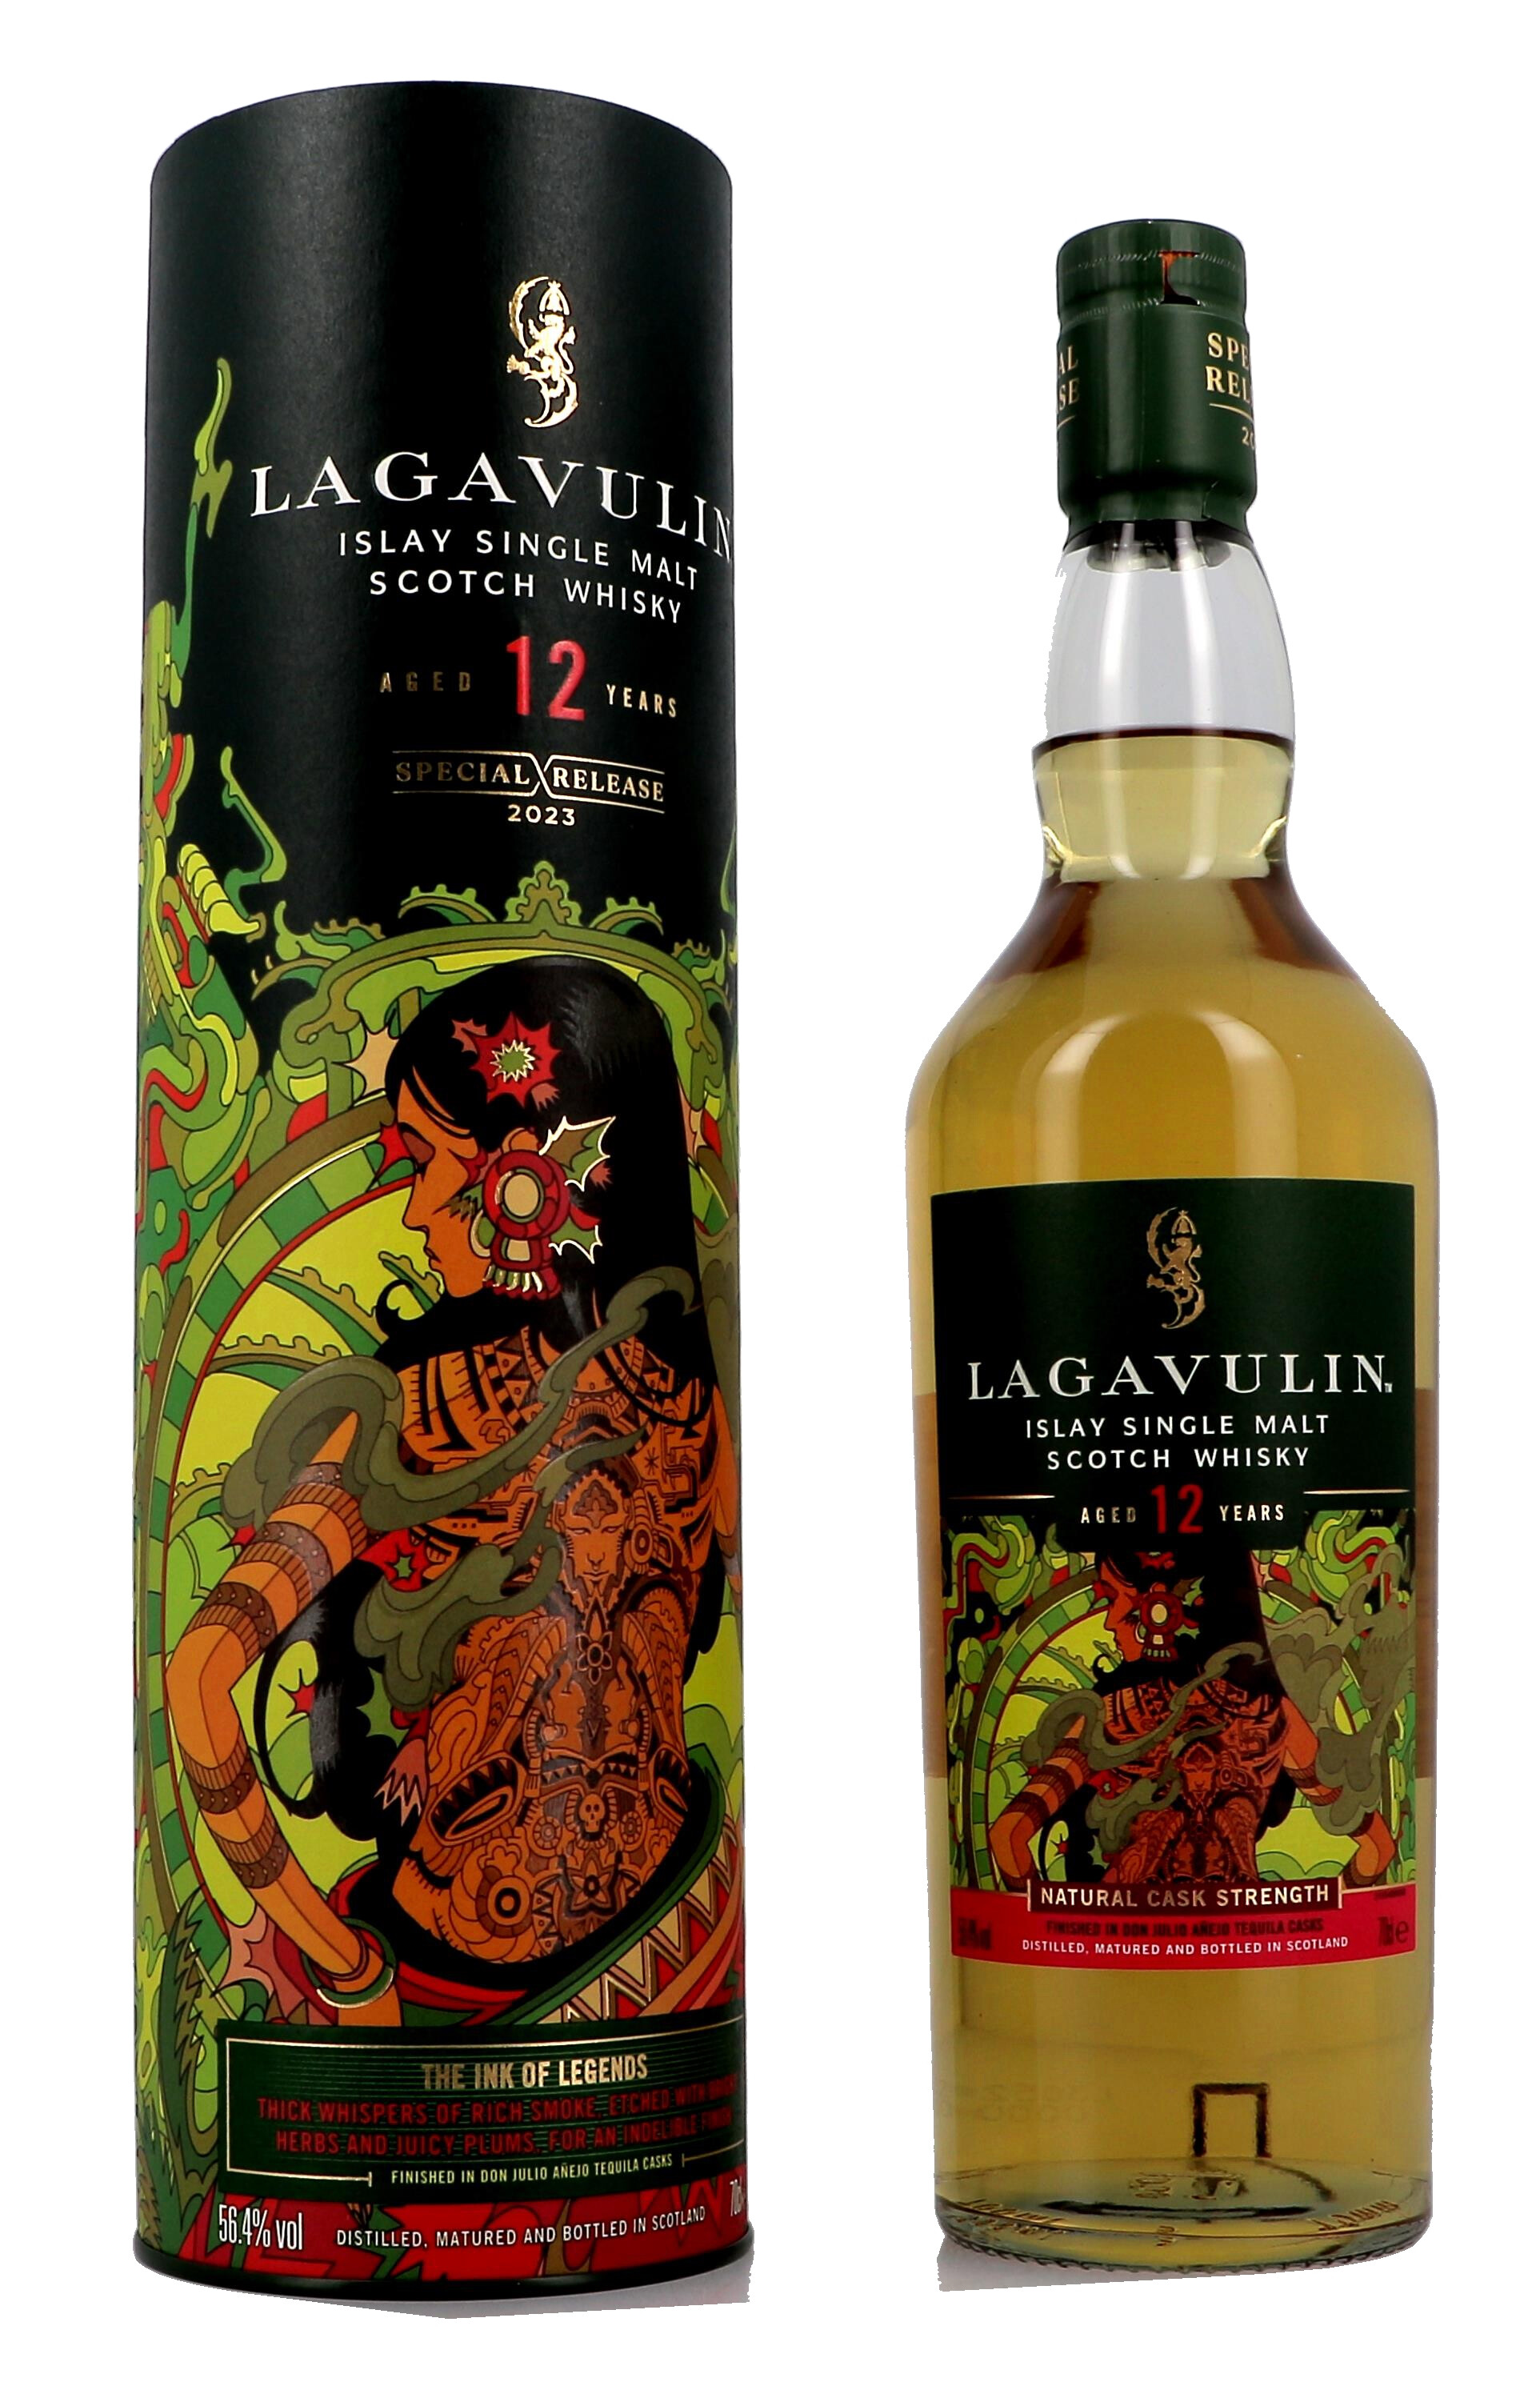 Lagavulin 12 years Special Release 2023 70cl Cask Strenght 55,1% Islay Single Malt Scotch Whisky